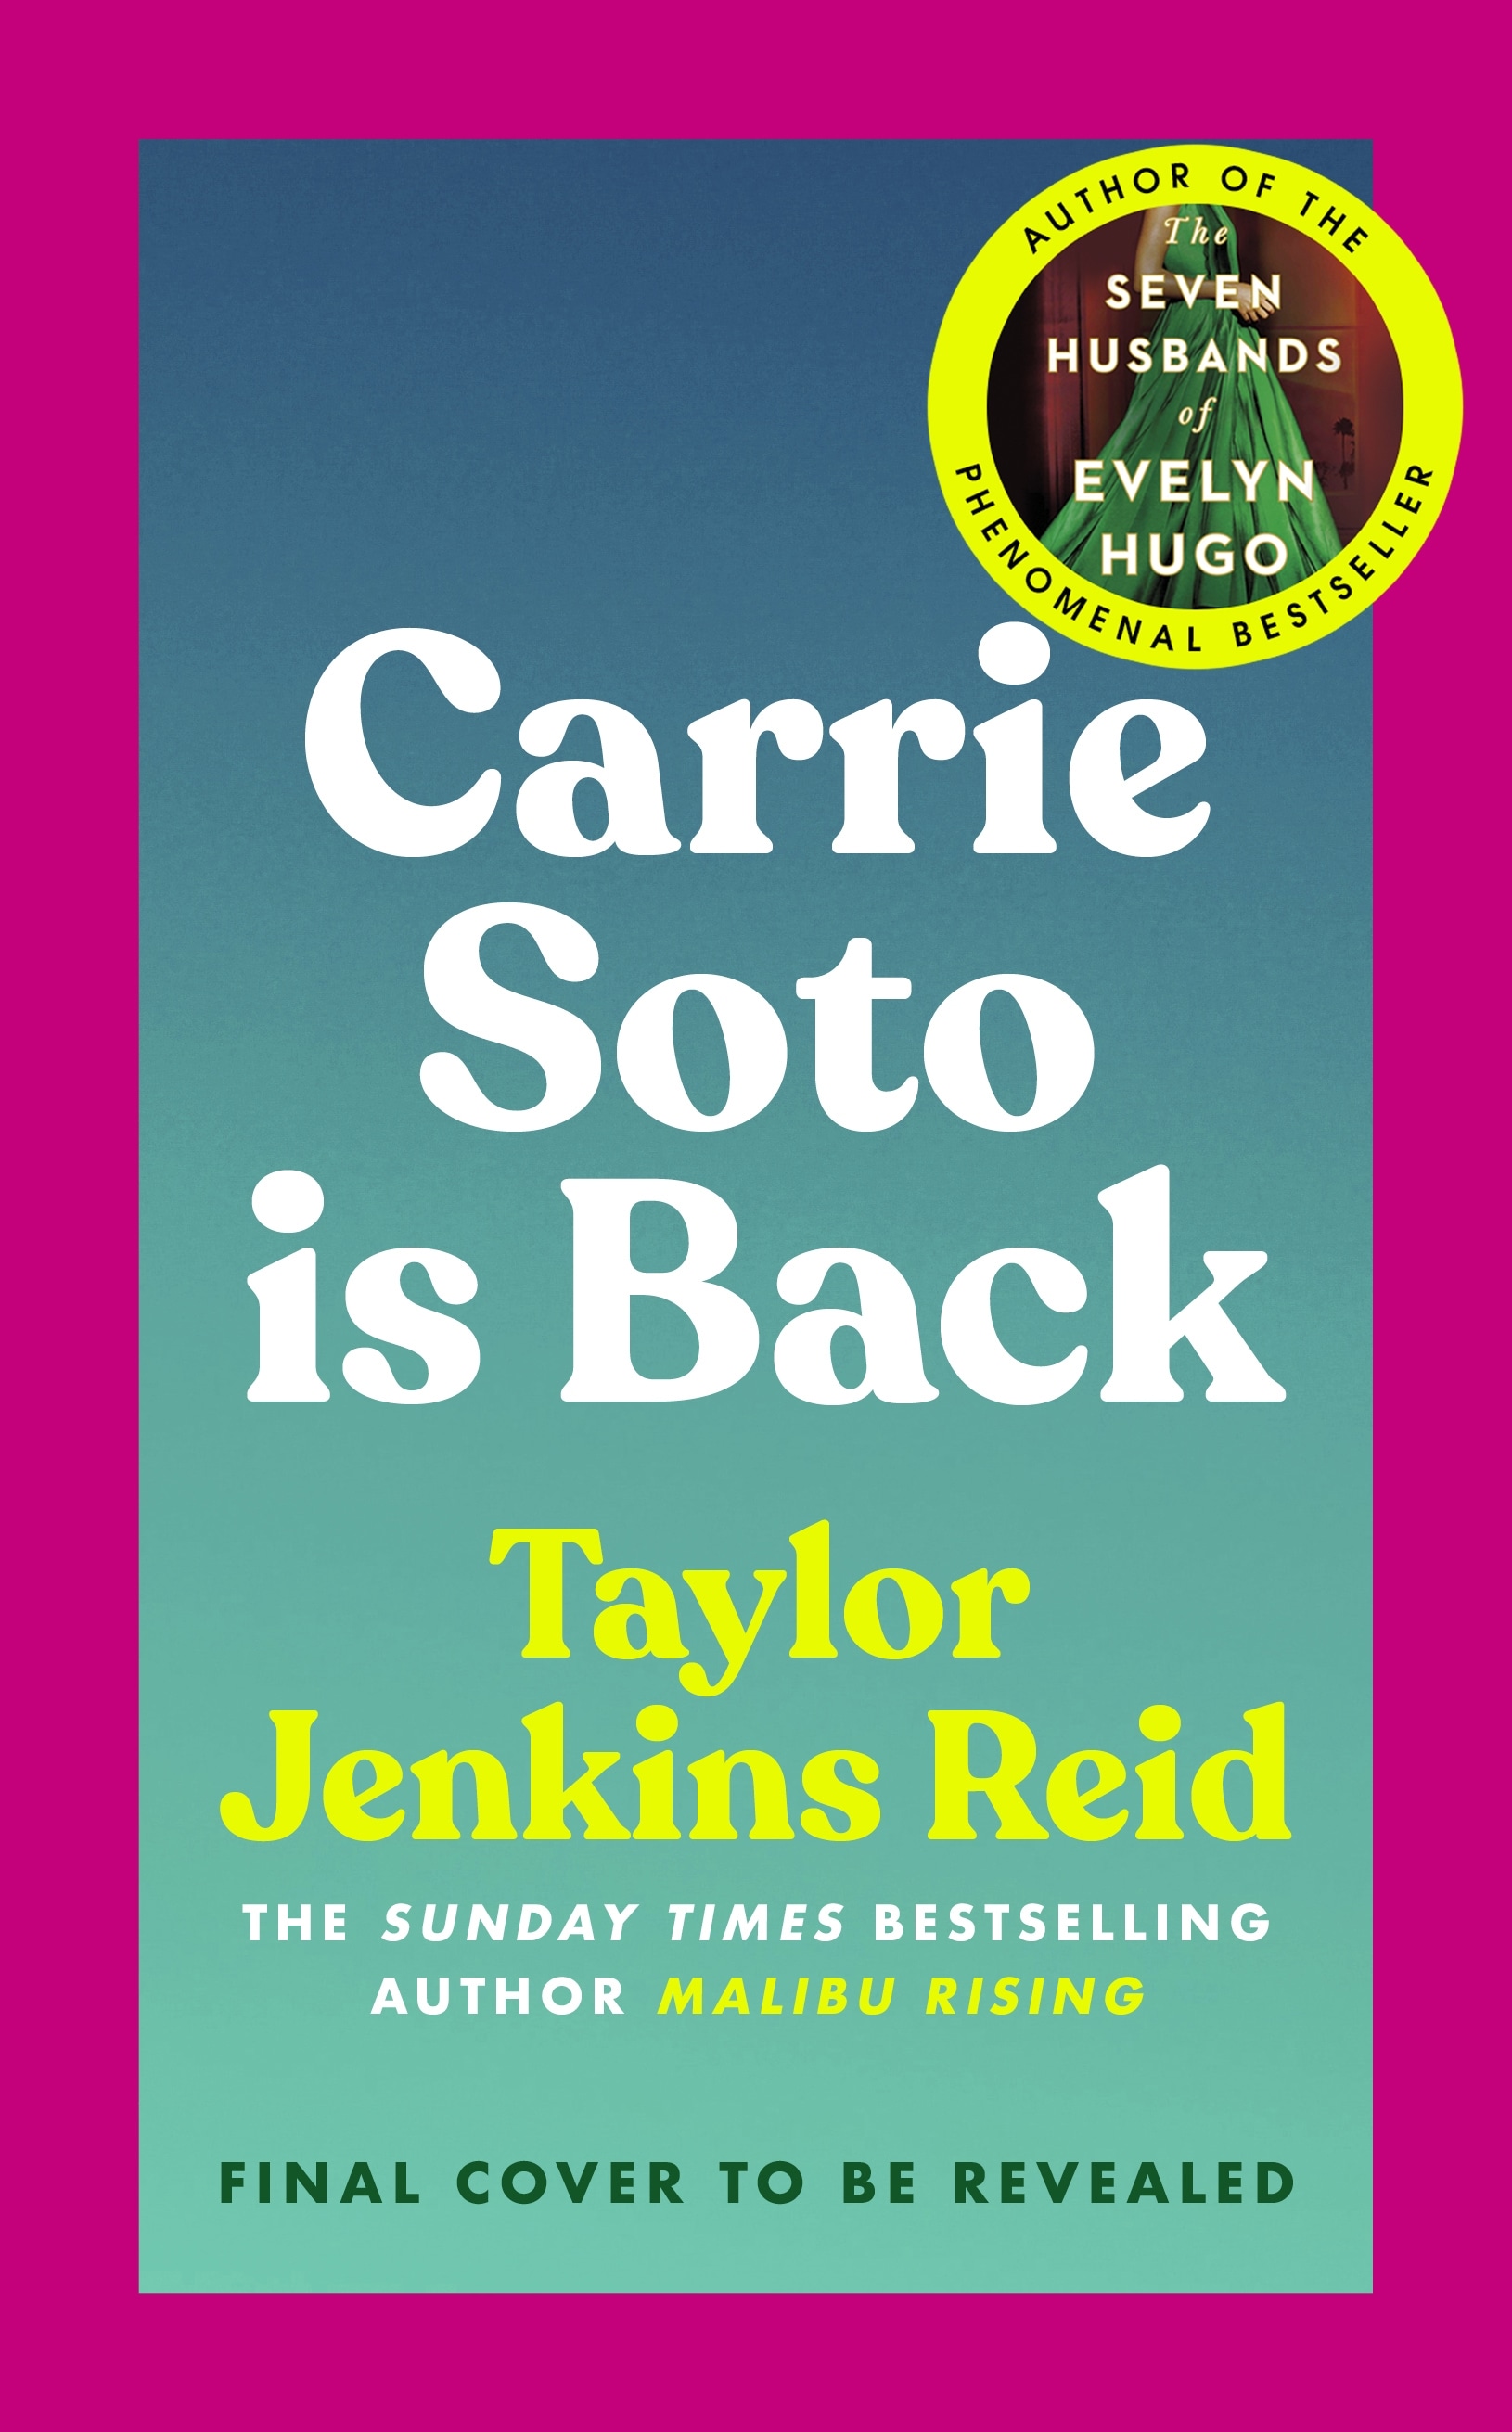 Book “Carrie Soto Is Back” by Taylor Jenkins Reid — August 30, 2022